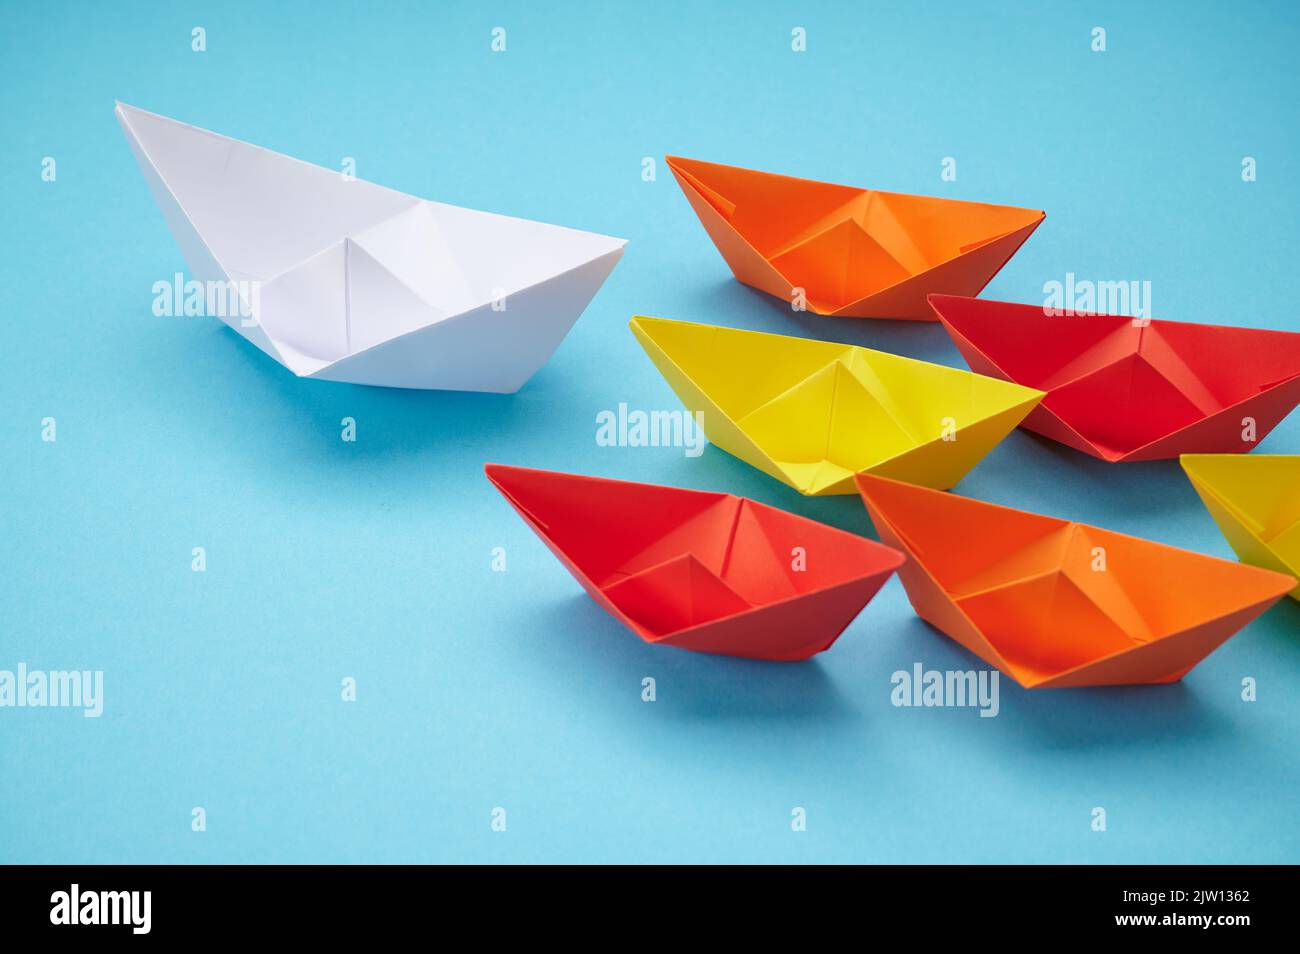 white paper boat leads a group of colored paper boats on blue background Stock Photo